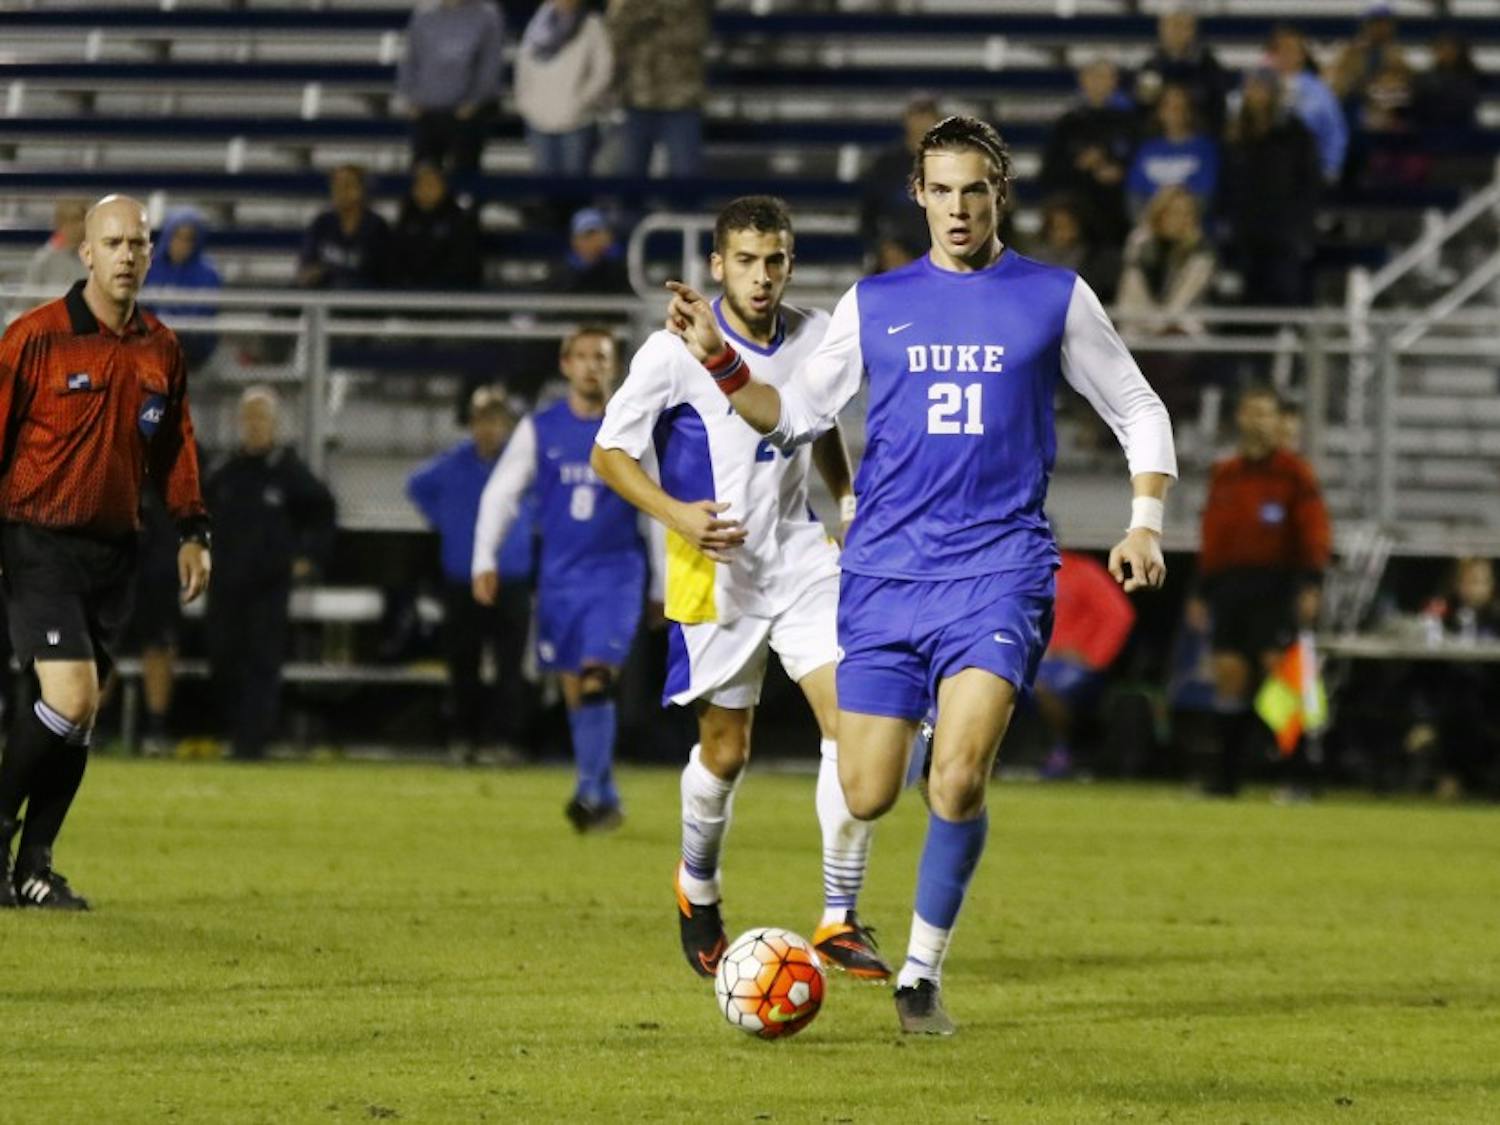 Sophomore Markus Fjørtoft and the Blue Devils built momentum Monday with a win against No. 23 Hofstra and will attempt to take down their second consecutive ranked opponent Saturday at No. 7 Notre Dame.